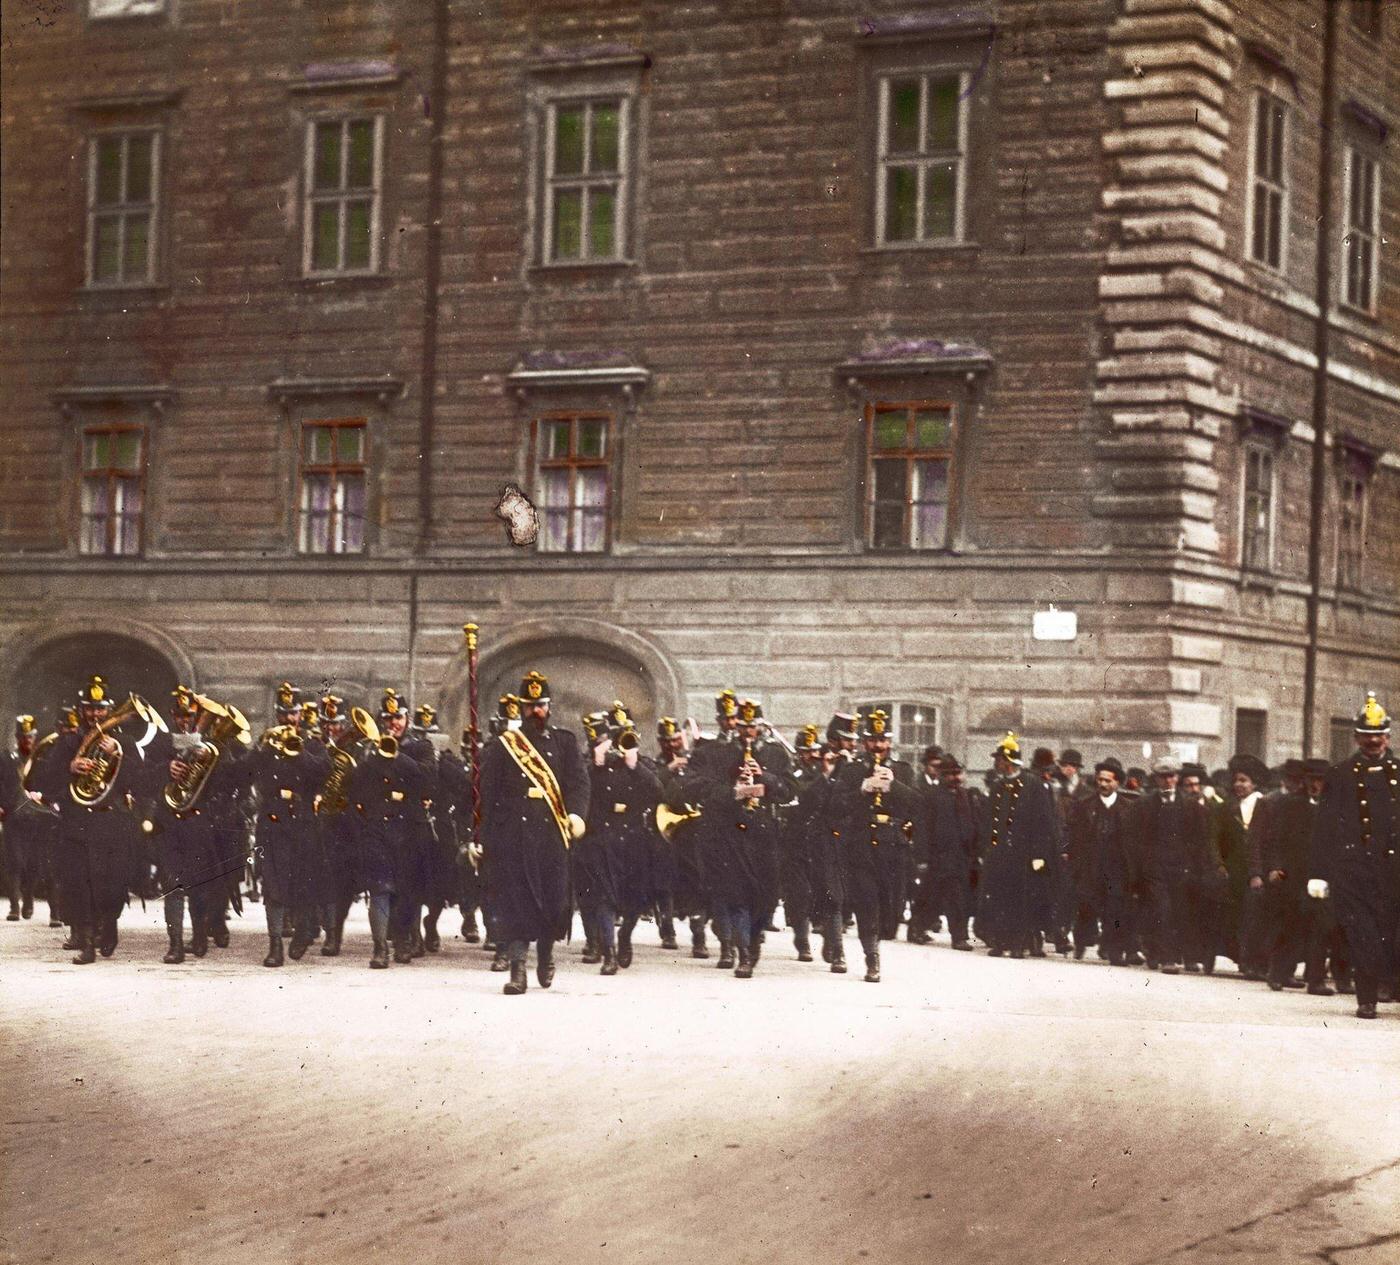 Musicians of the Viennese Hoch- und Deutschmeister, the so-called "Burgmusik," marching to the Inner Burghof in the Hofburg Imperial Palace, 1905.